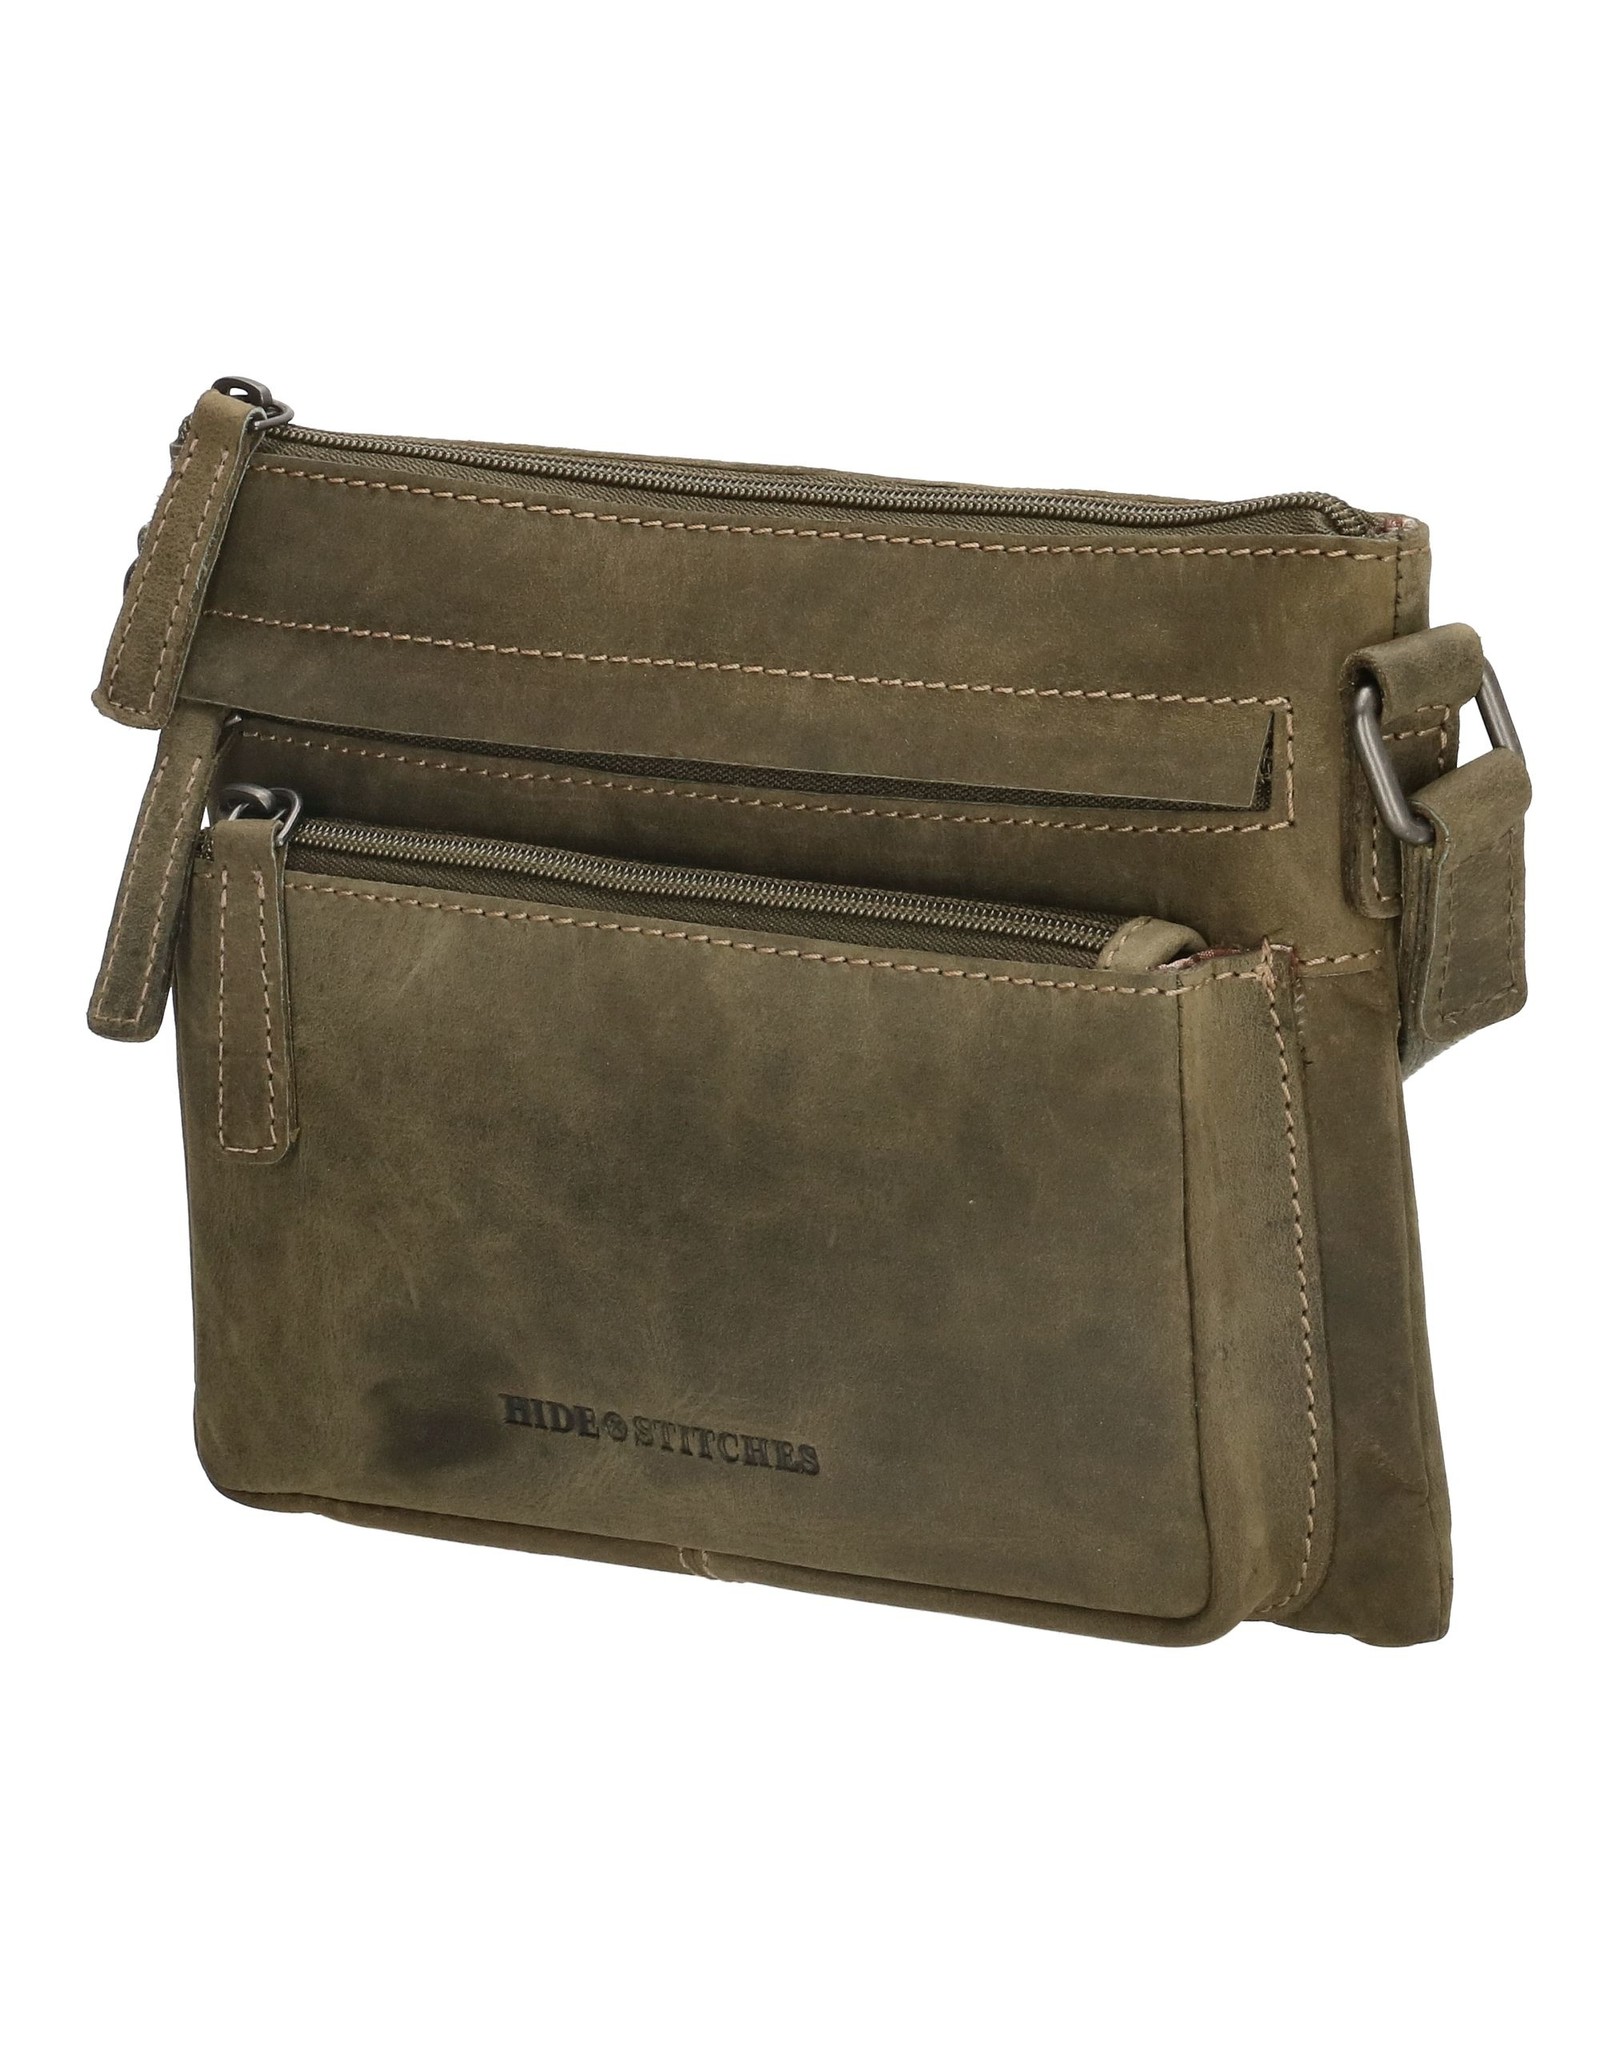 Hide & Stitches Leather bags - Hide & Stitches Shoulder bag with Phone pocket olive green